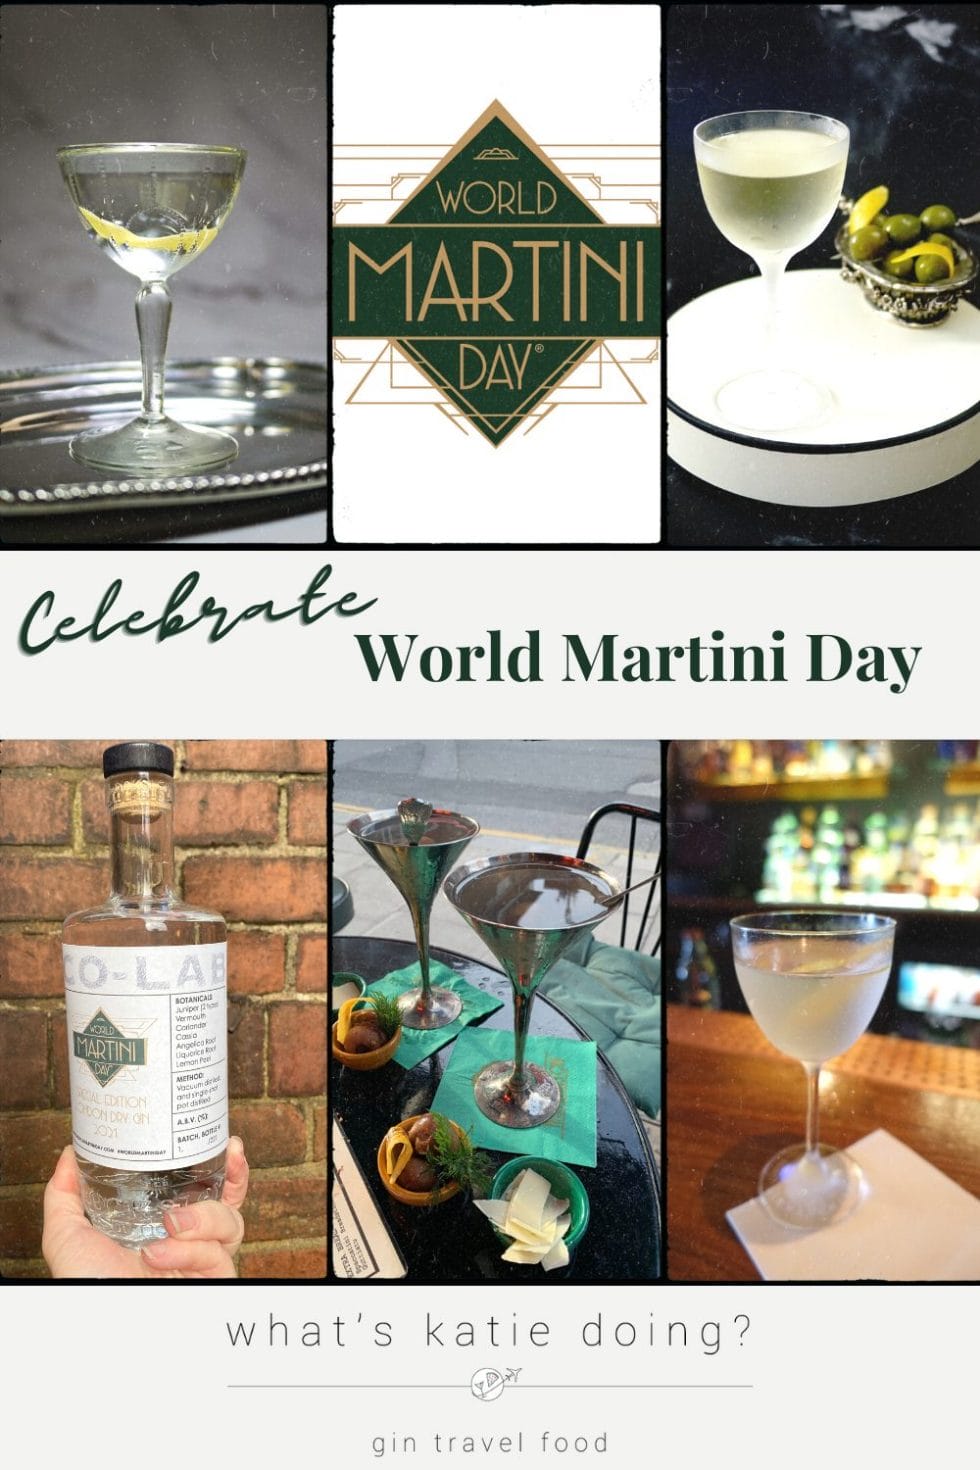 selection of 4 martini pictures, world martini day gin bottle and the world martini day logo